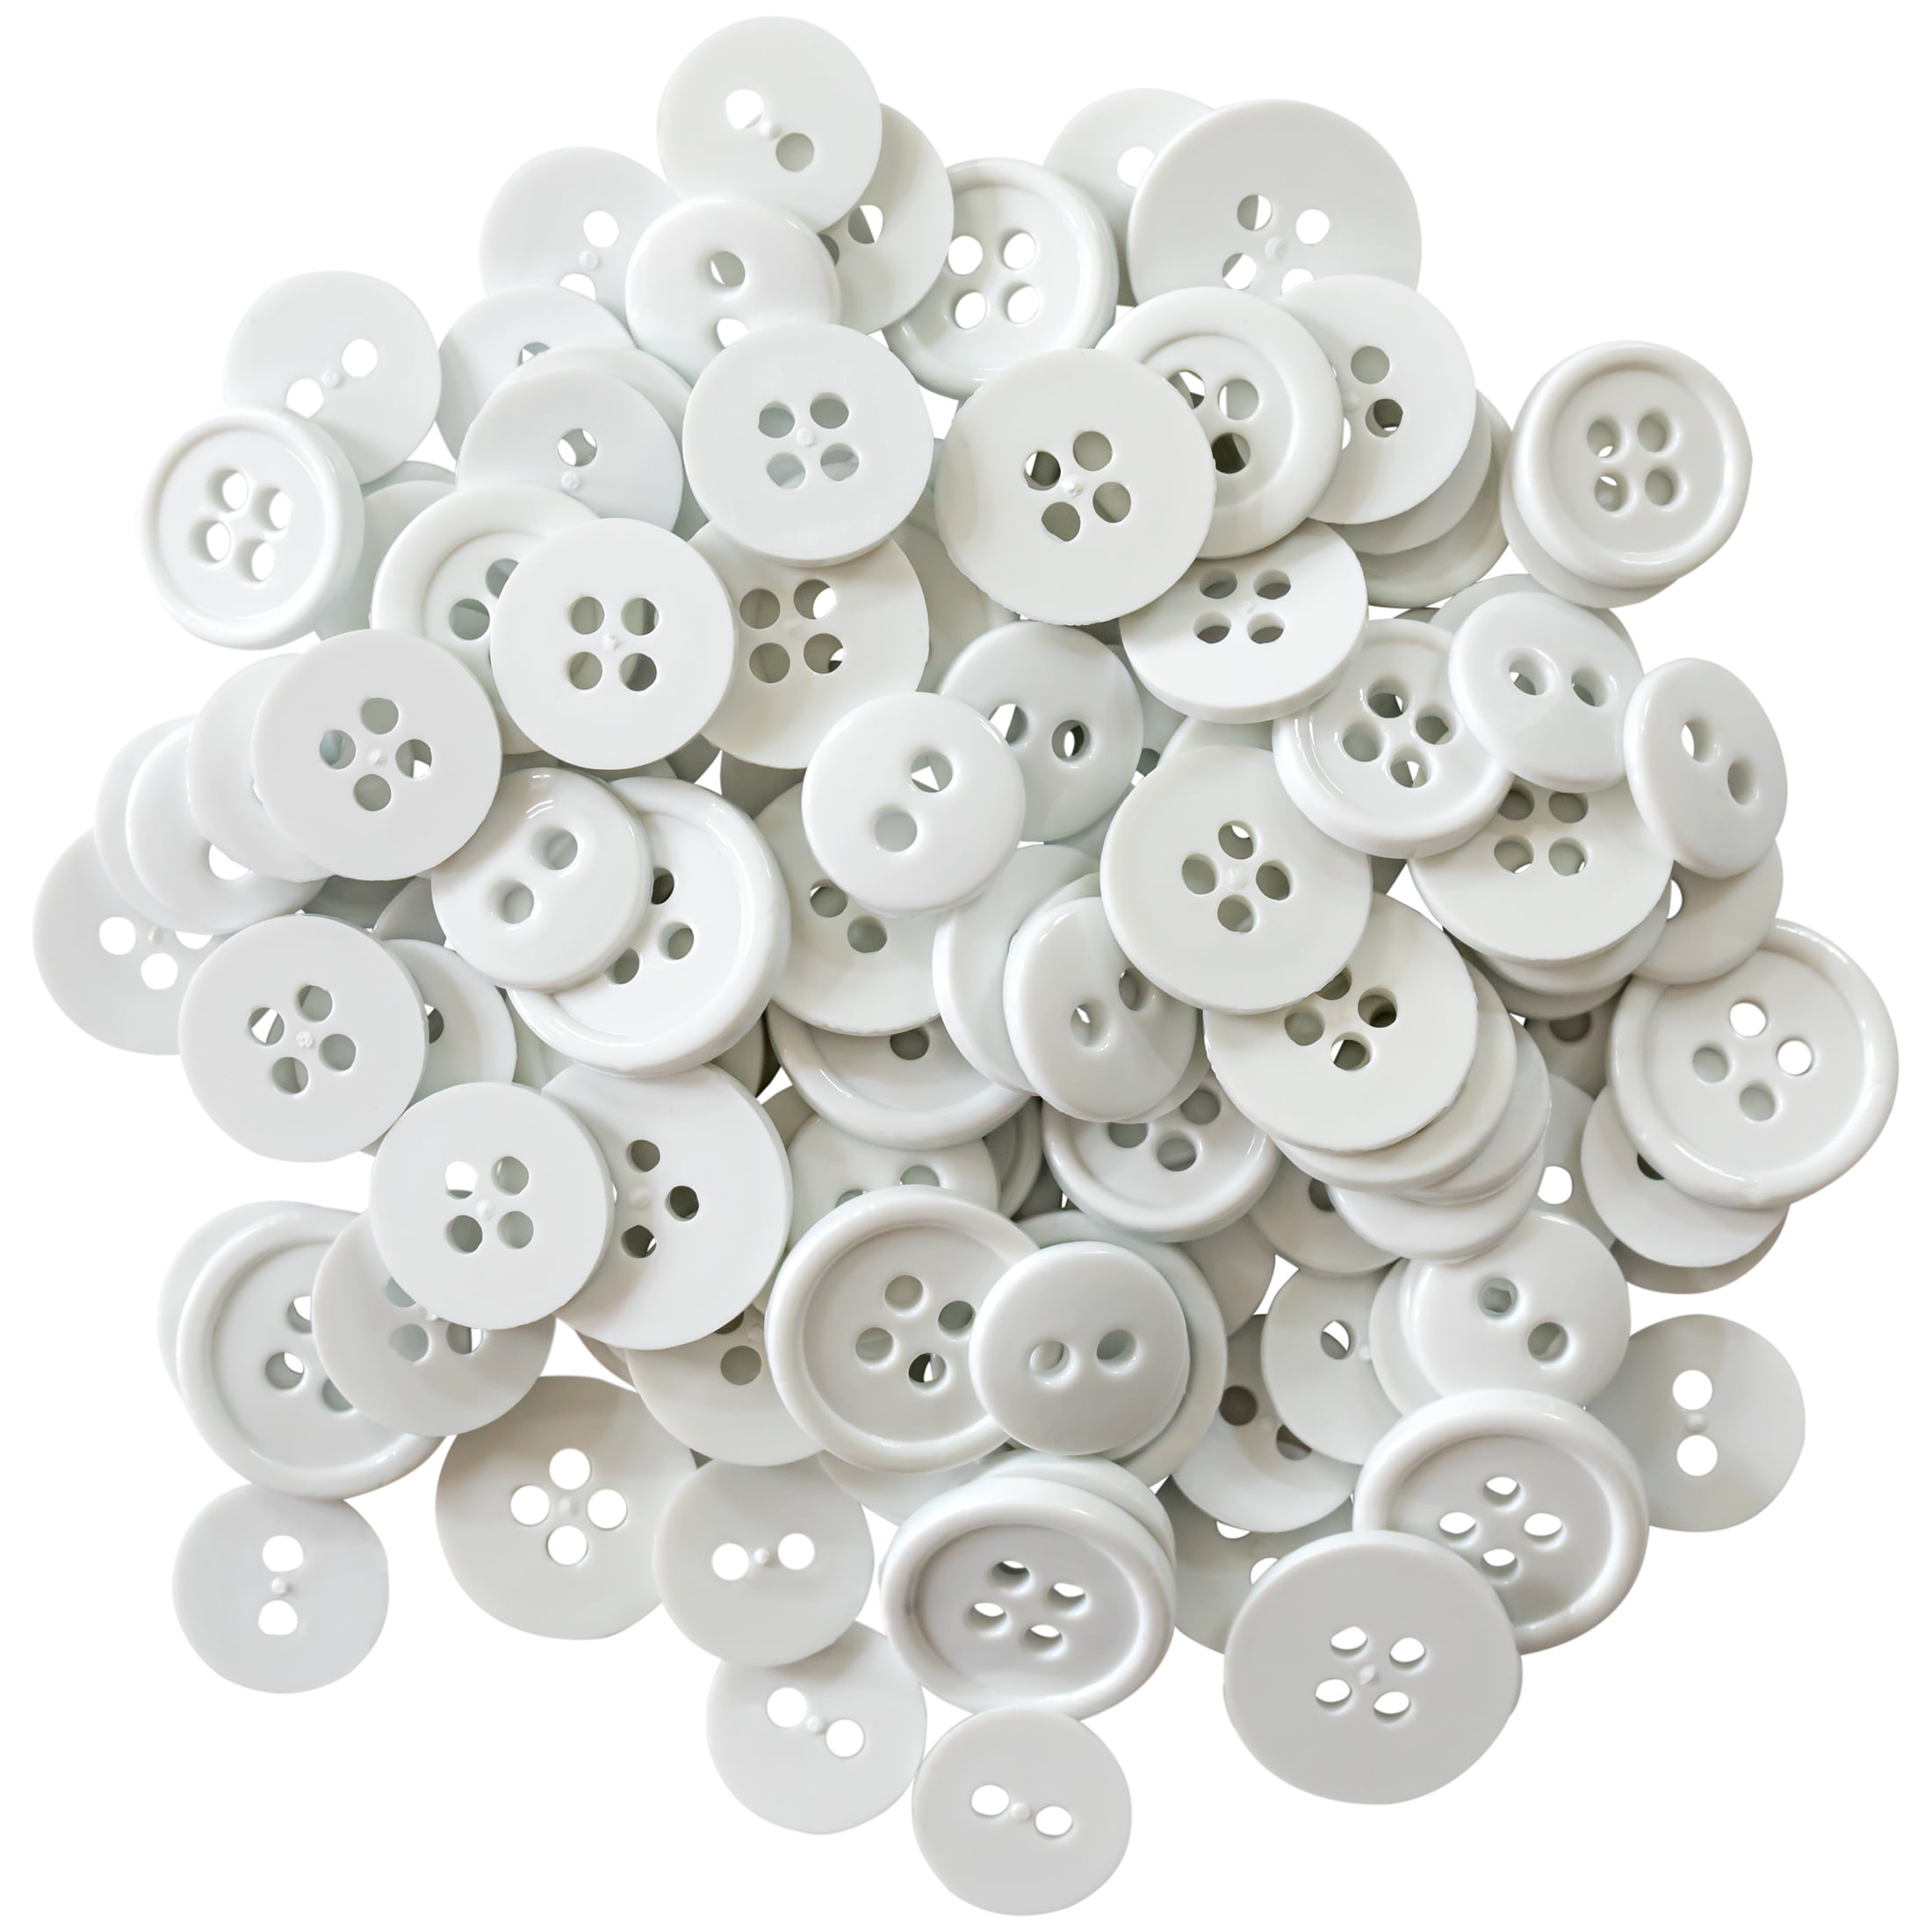 Favorite Findings Big Bag of Buttons - White